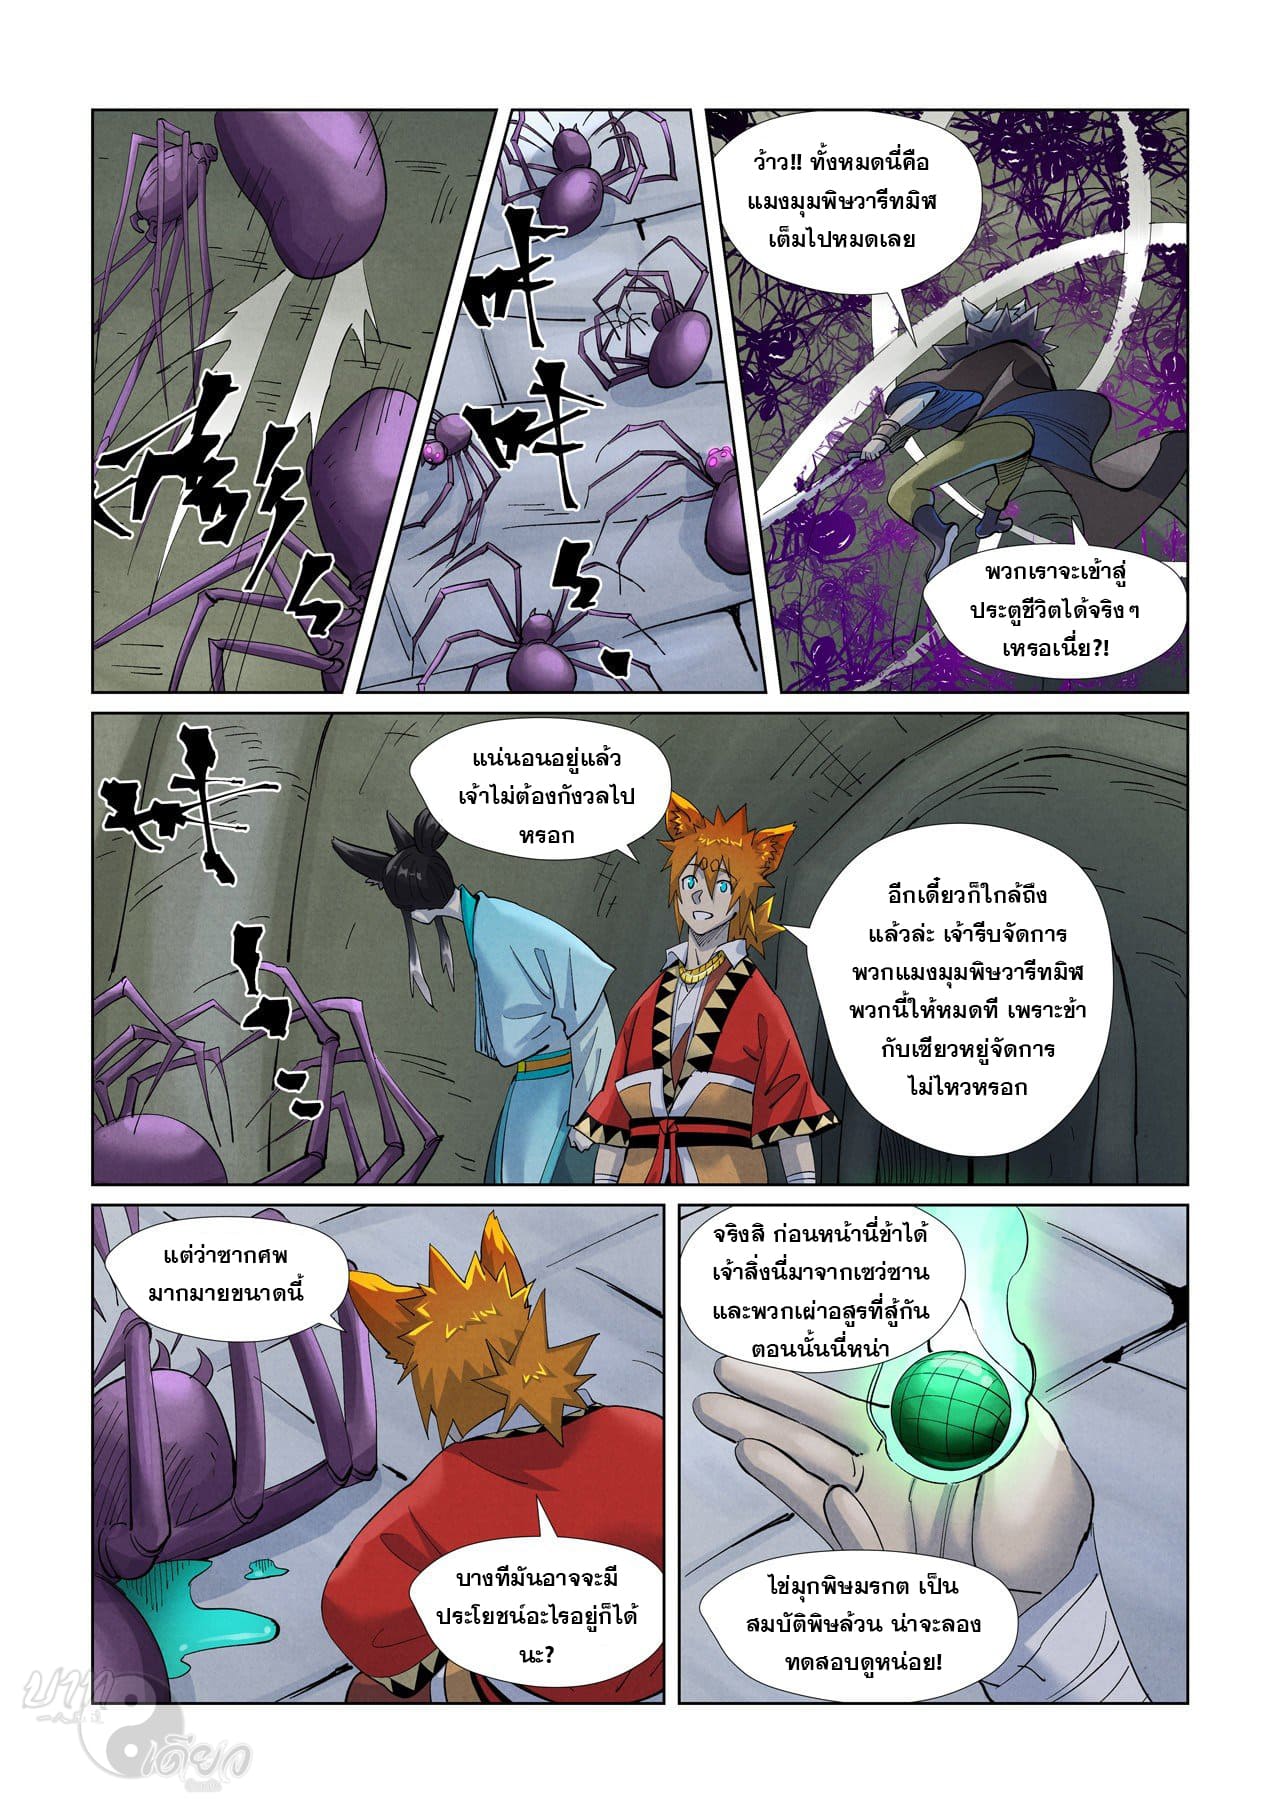 Tales-of-Demons-and-Gods-394-09.jpg